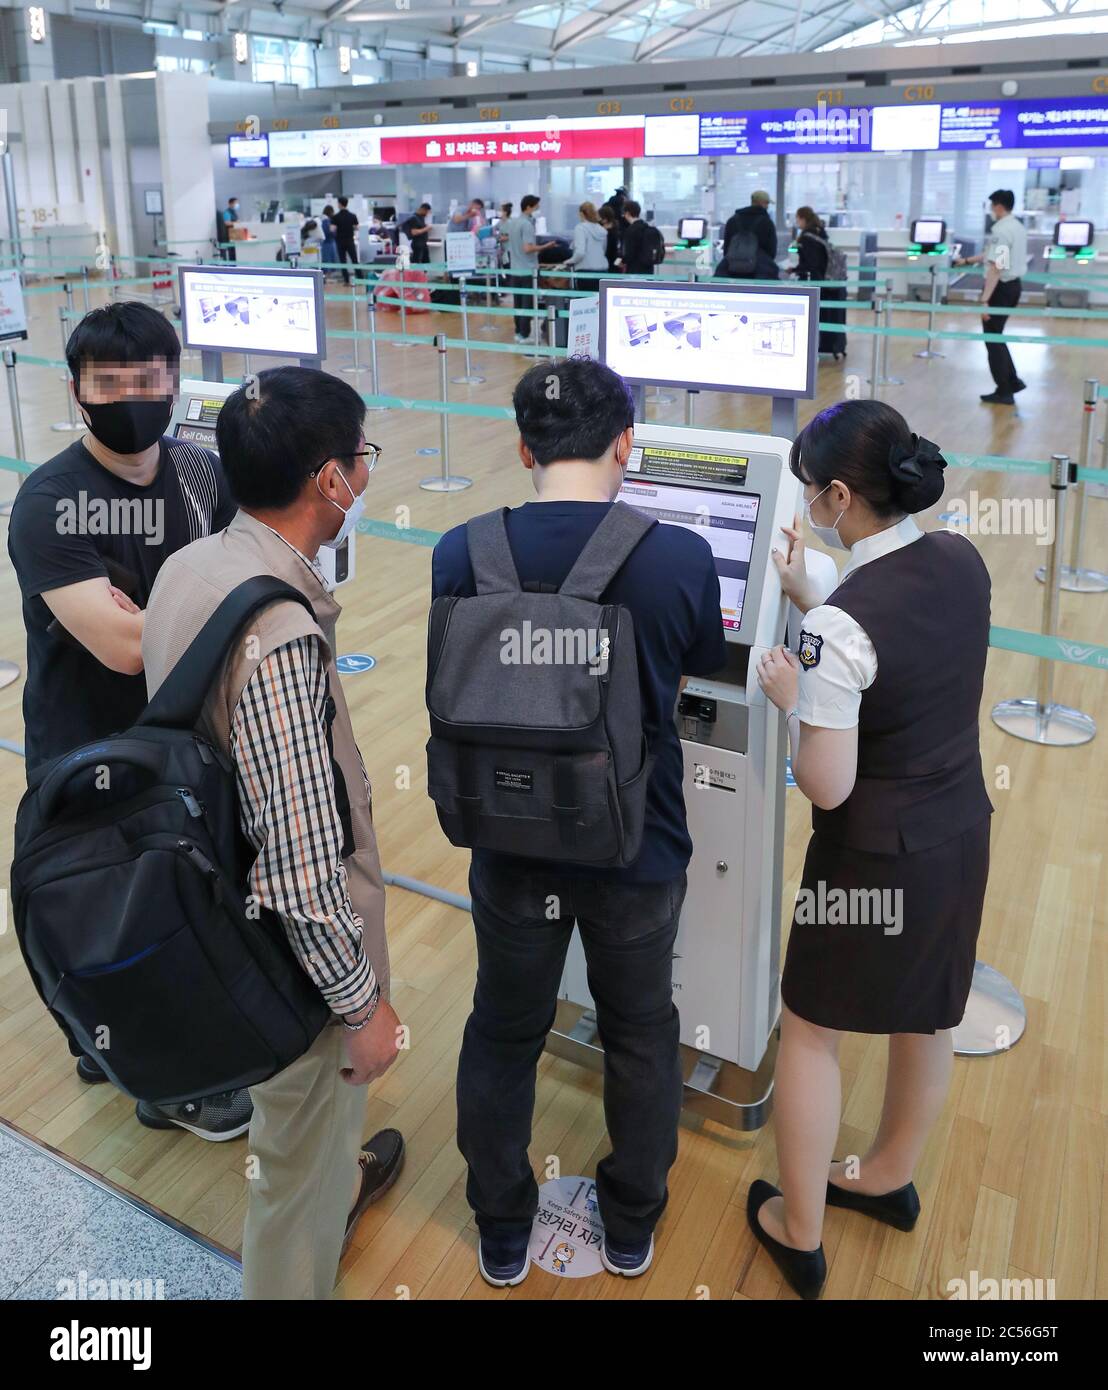 01st July, 2020. EU's lifting of entry ban on 14 countries Passengers arrive at a check-in counter for flights at the Incheon airport, west of Seoul, on July 1, 2020, one day after the European Union approved a guideline recommending its member states reopen their borders to 14 countries, including South Korea. The recommendation came after it restricted all nonessential entries from outside the bloc amid the coronavirus pandemic. Credit: Yonhap/Newcom/Alamy Live News Stock Photo